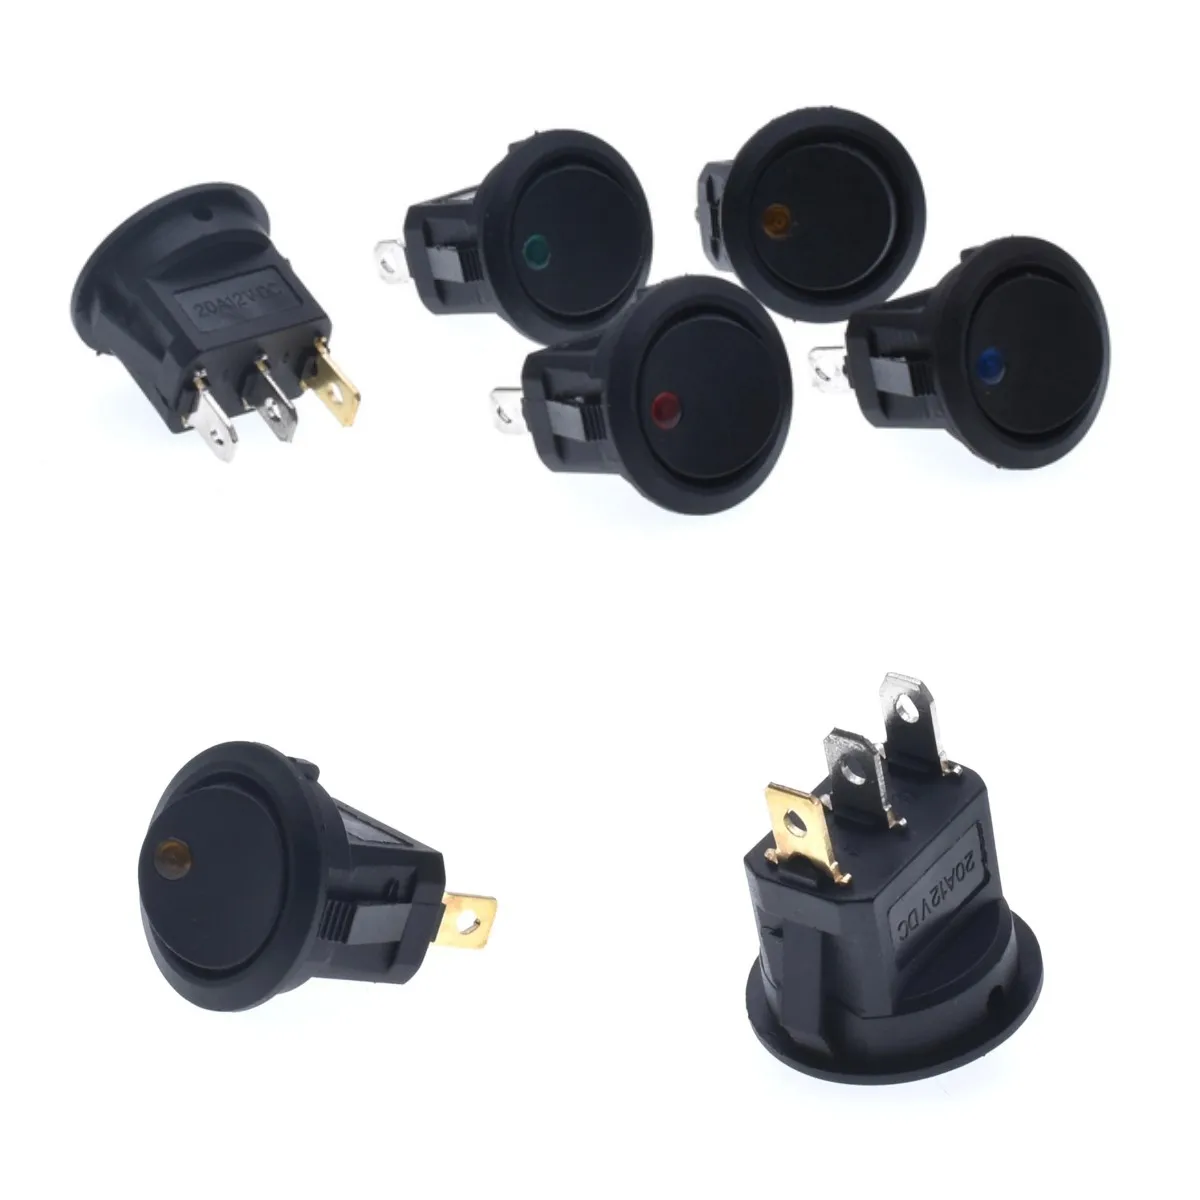 5PCS/Lot KCD1 12V 3PIN RED Black Green Blue,Cat's eye with light,Small Round DPDT Push Button Boat Power Hot Sale Rocker Switche